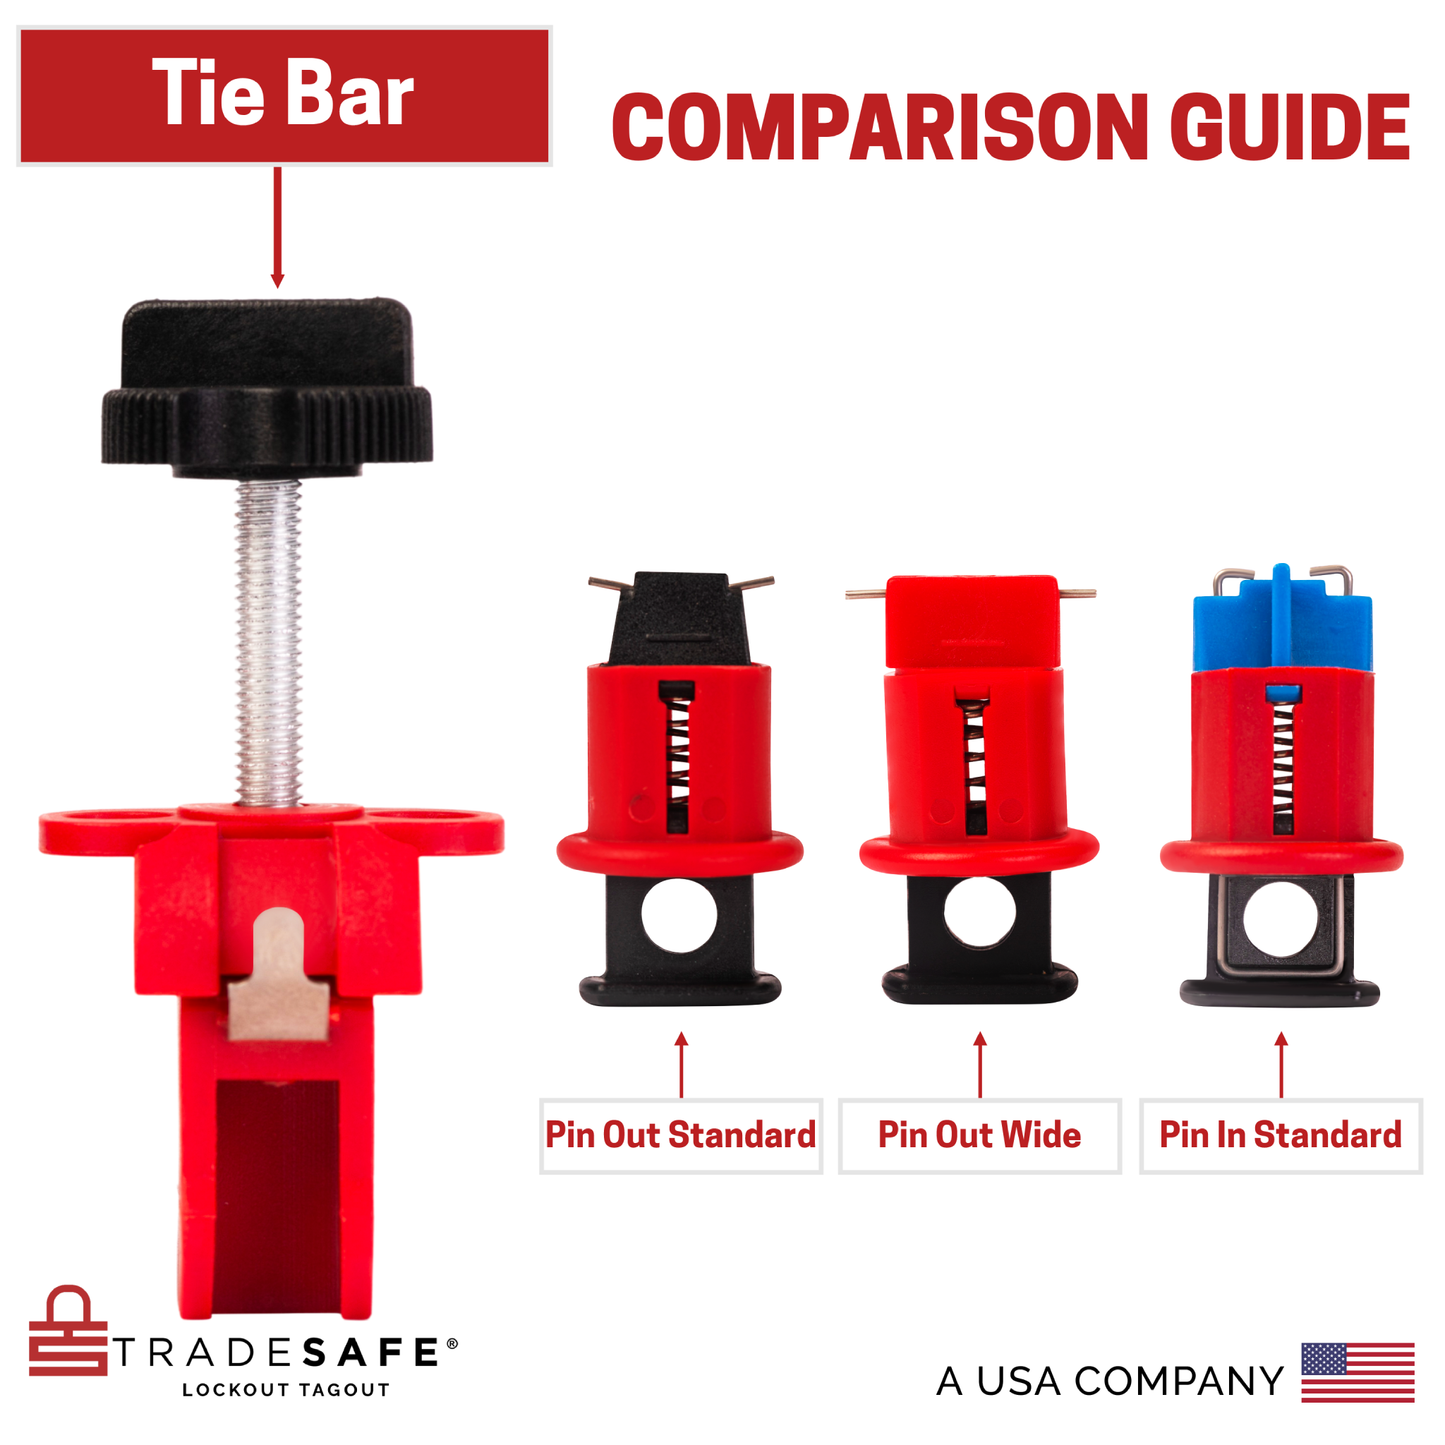 illustration comparing pin out standard, pin in standard, pin out wide standard, and tie bar miniature circuit breaker lockout